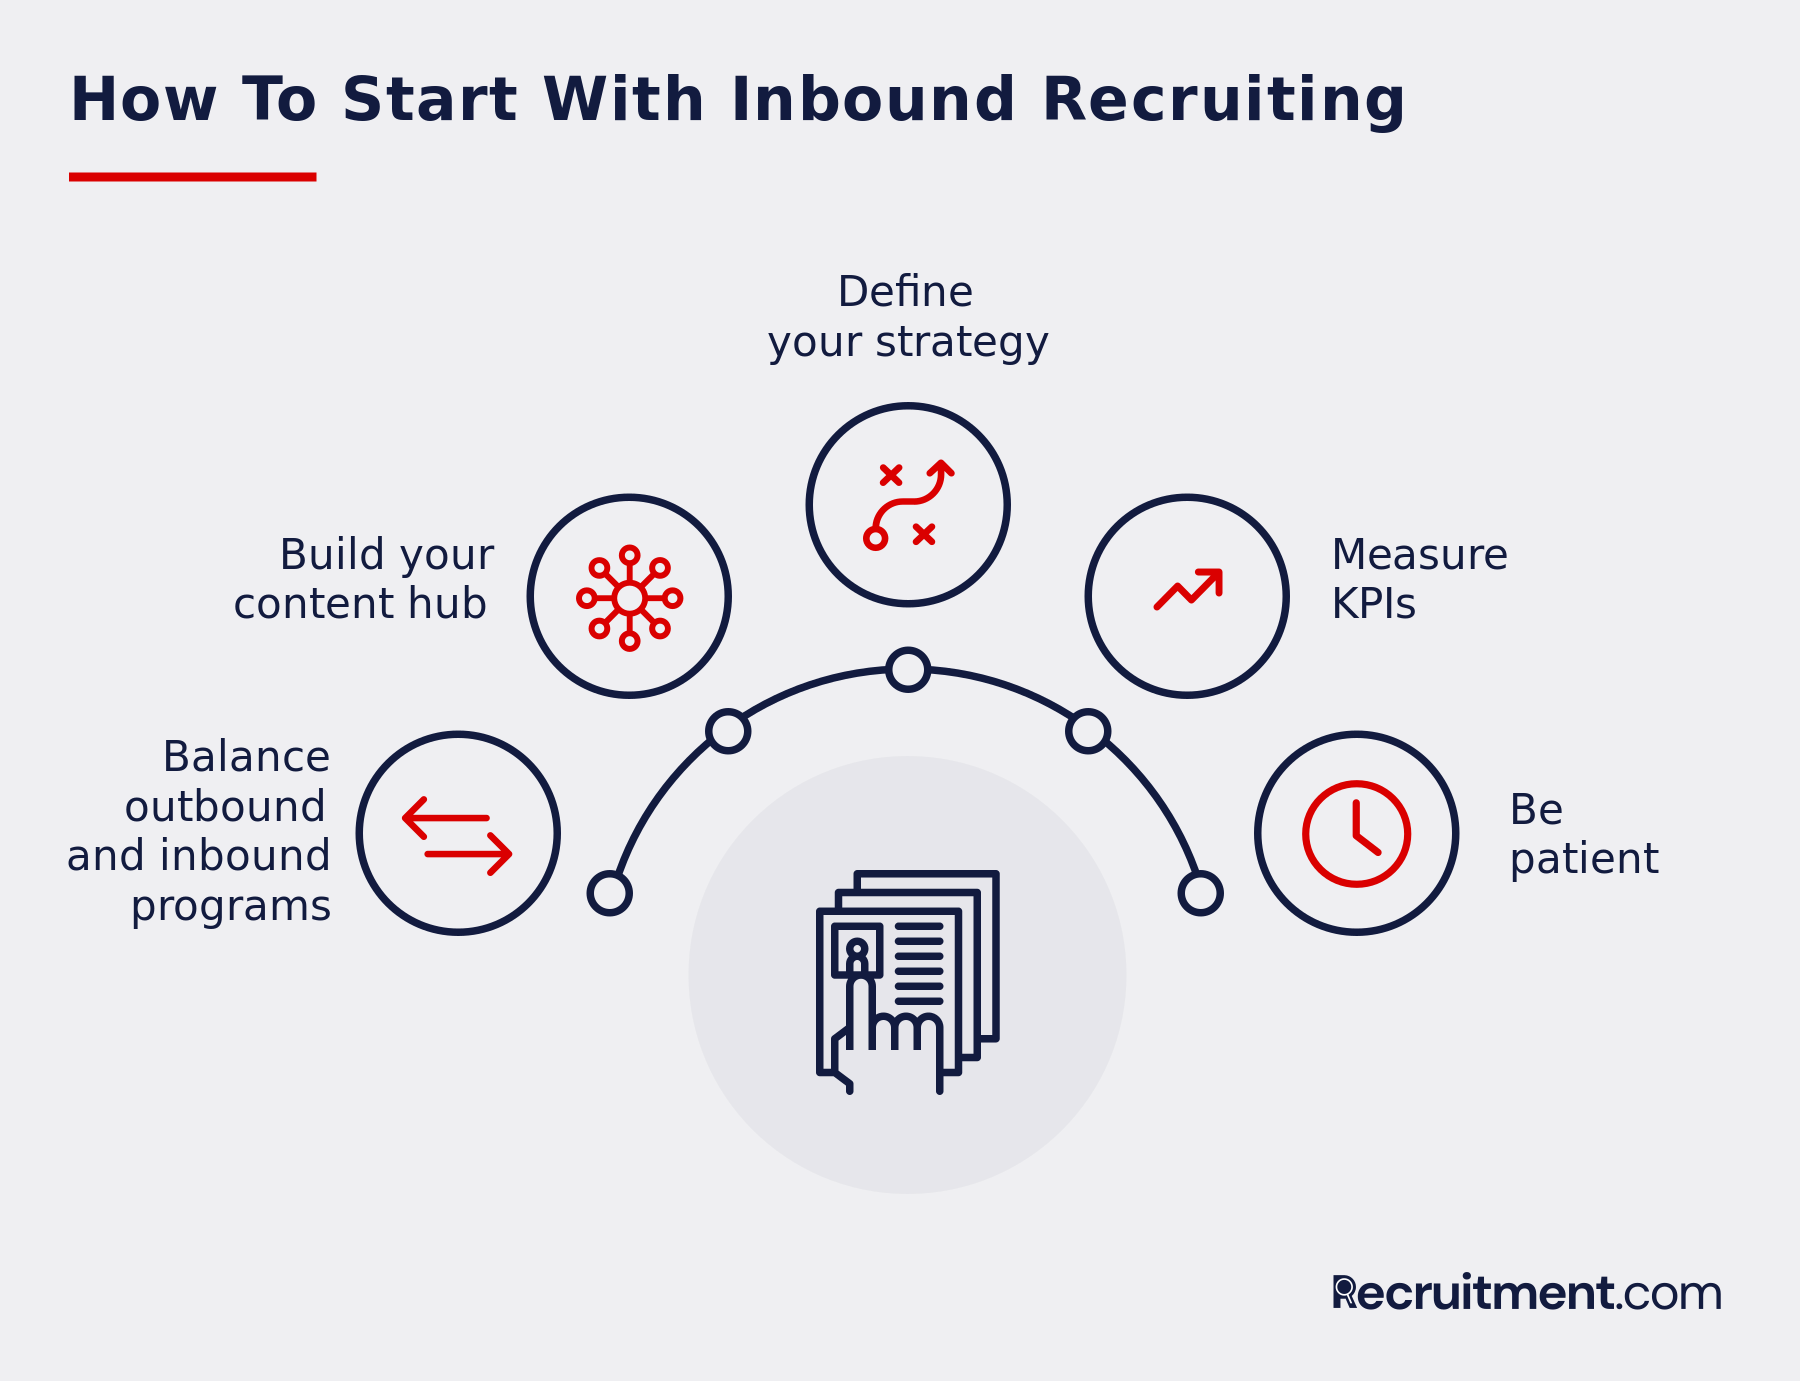 How To Build An Inbound Recruiting Strategy 9292